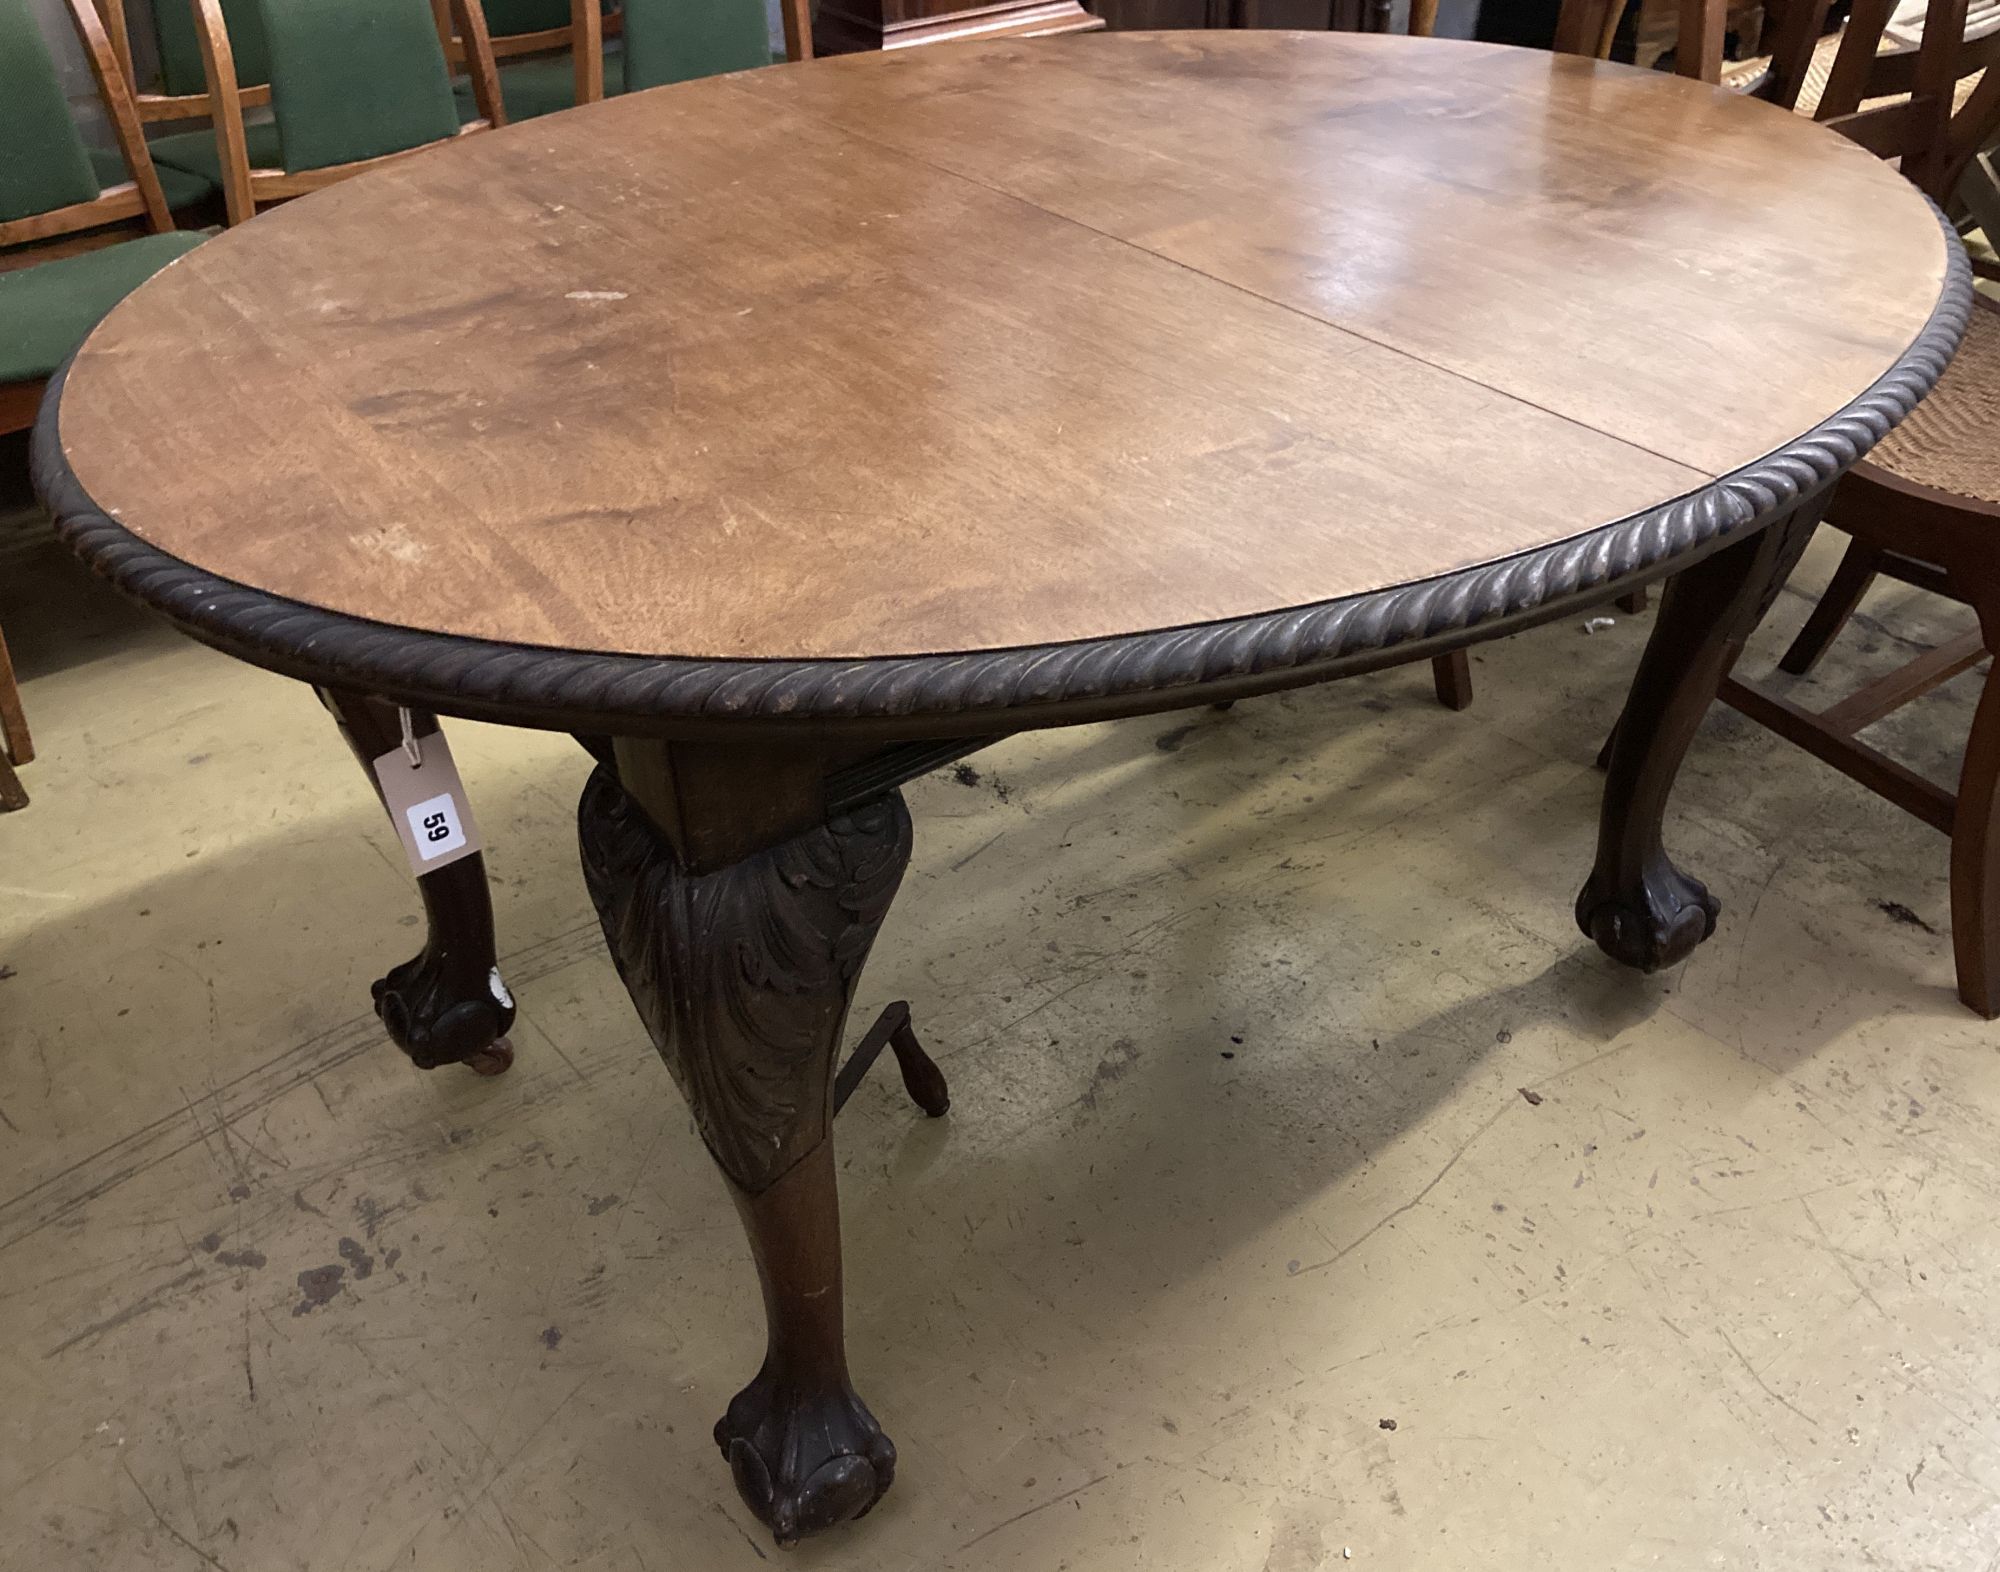 A 1920s oval extending Victorian dining table,- winder, no leaves, length 132cm, depth 106cm, height 74cm